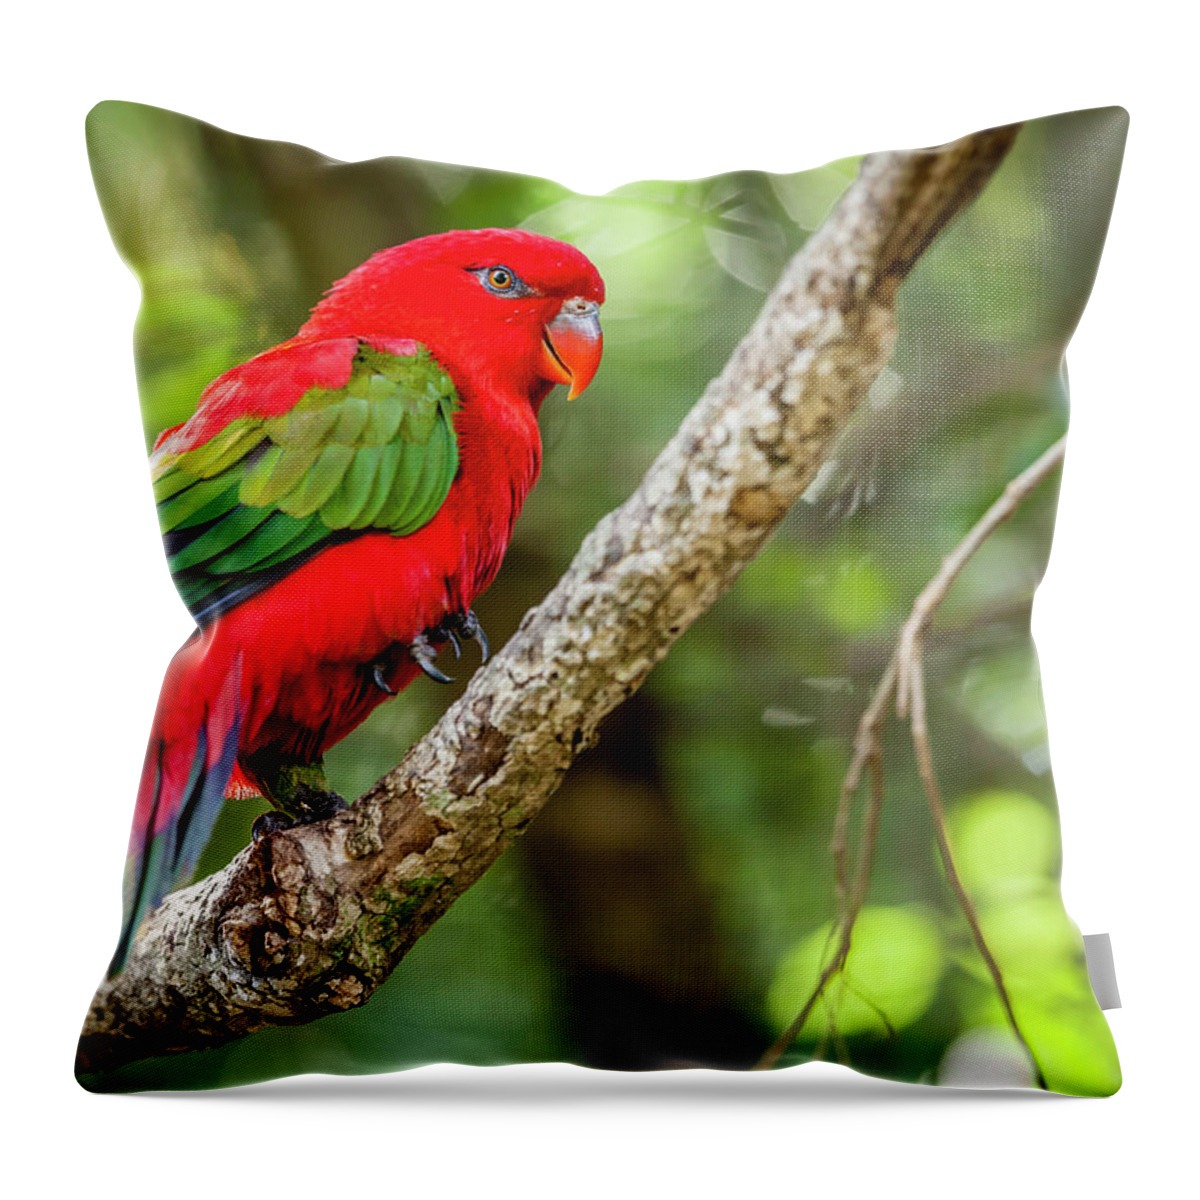 Plettenberg Bay Throw Pillow featuring the photograph Chattering Lory by Alexey Stiop